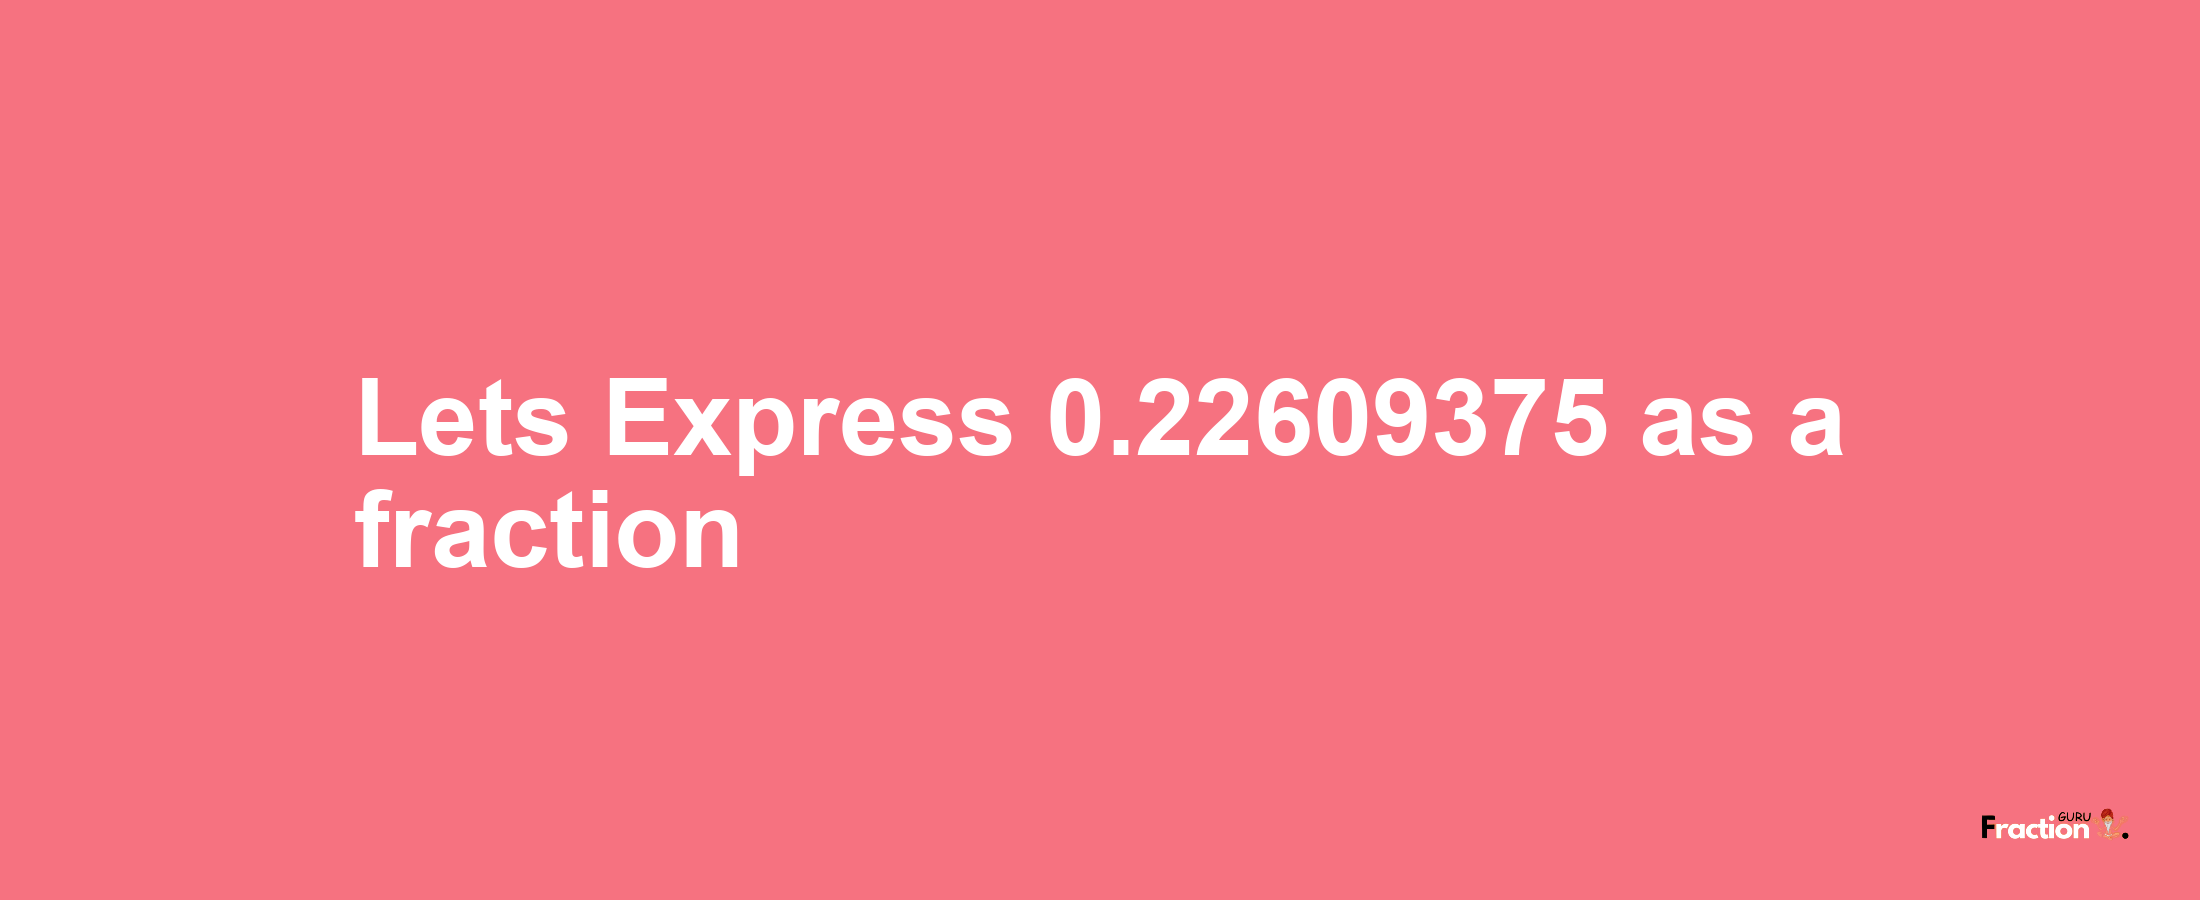 Lets Express 0.22609375 as afraction